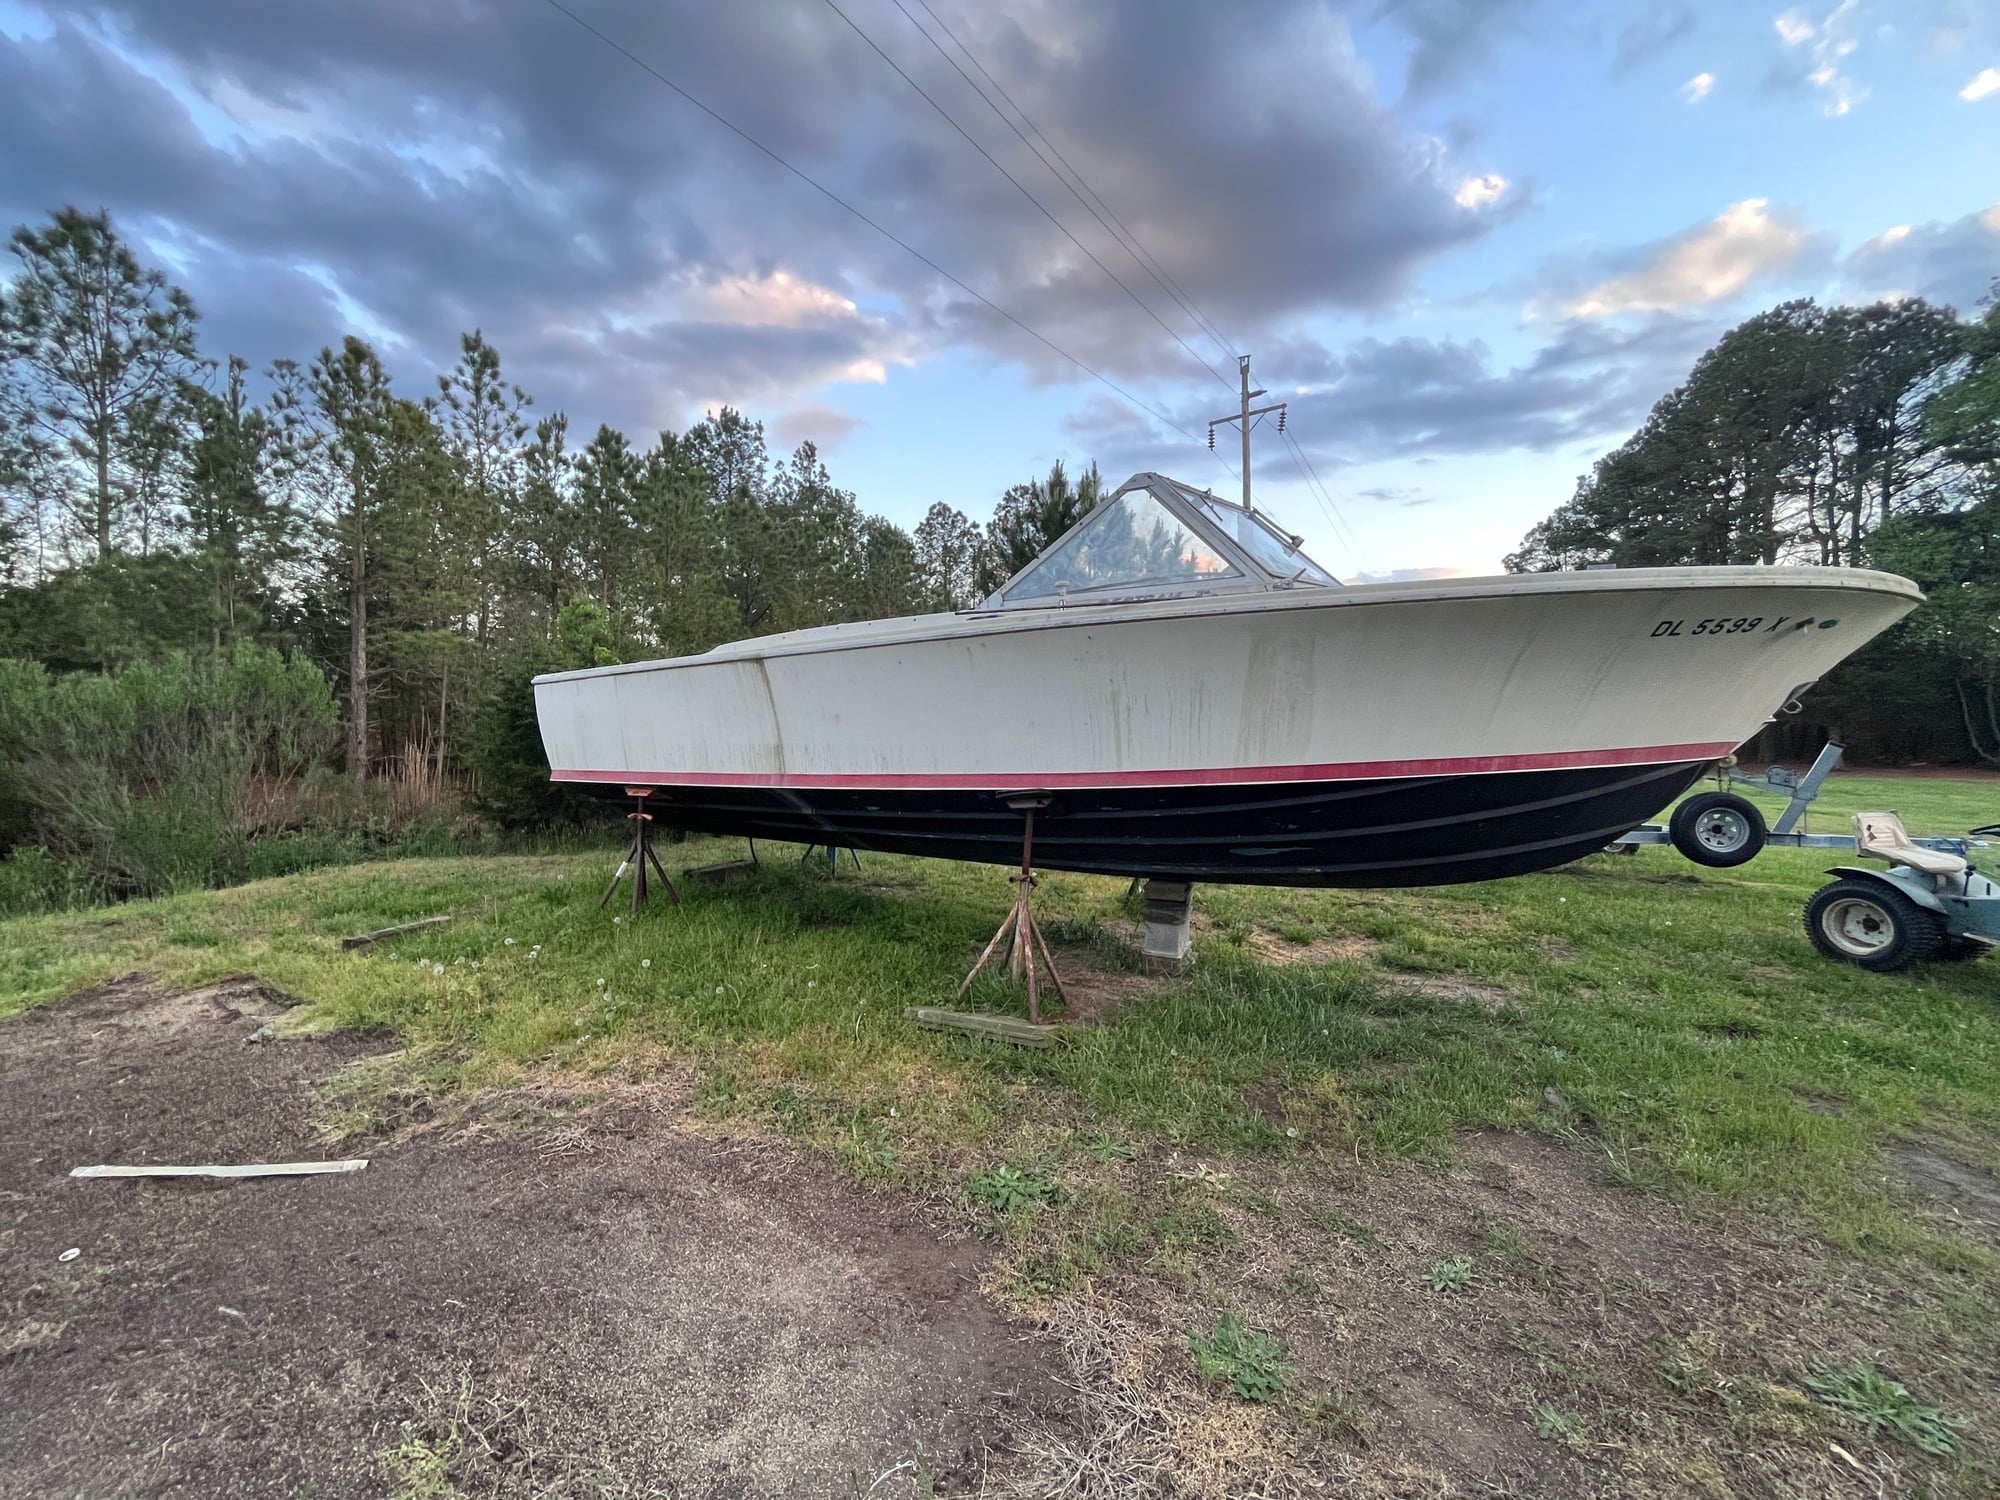 2016 39' Venture for sale. - The Hull Truth - Boating and Fishing Forum